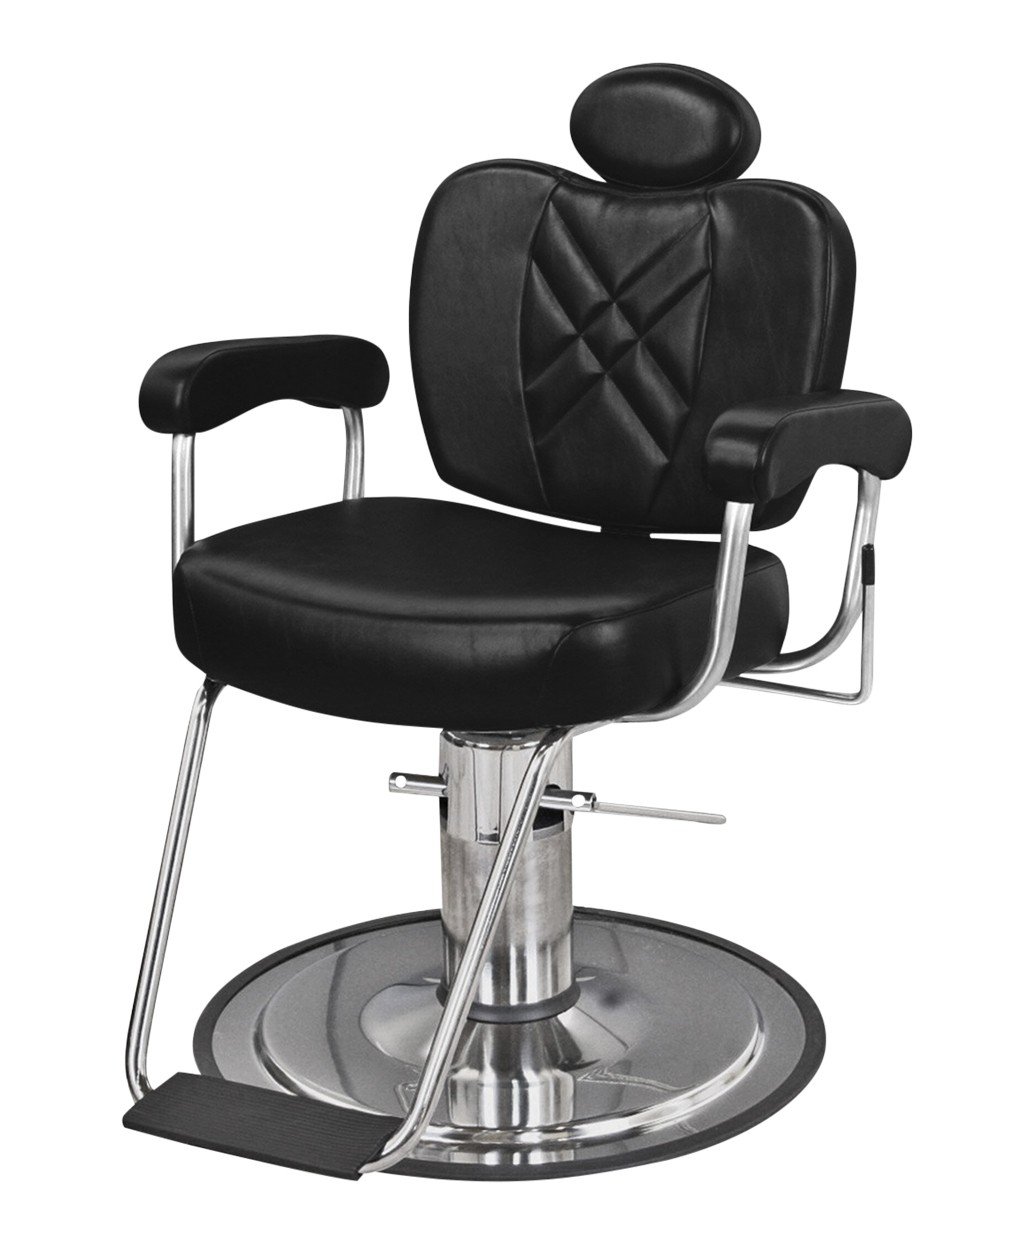 Collins 8070 Metro Barber Chair